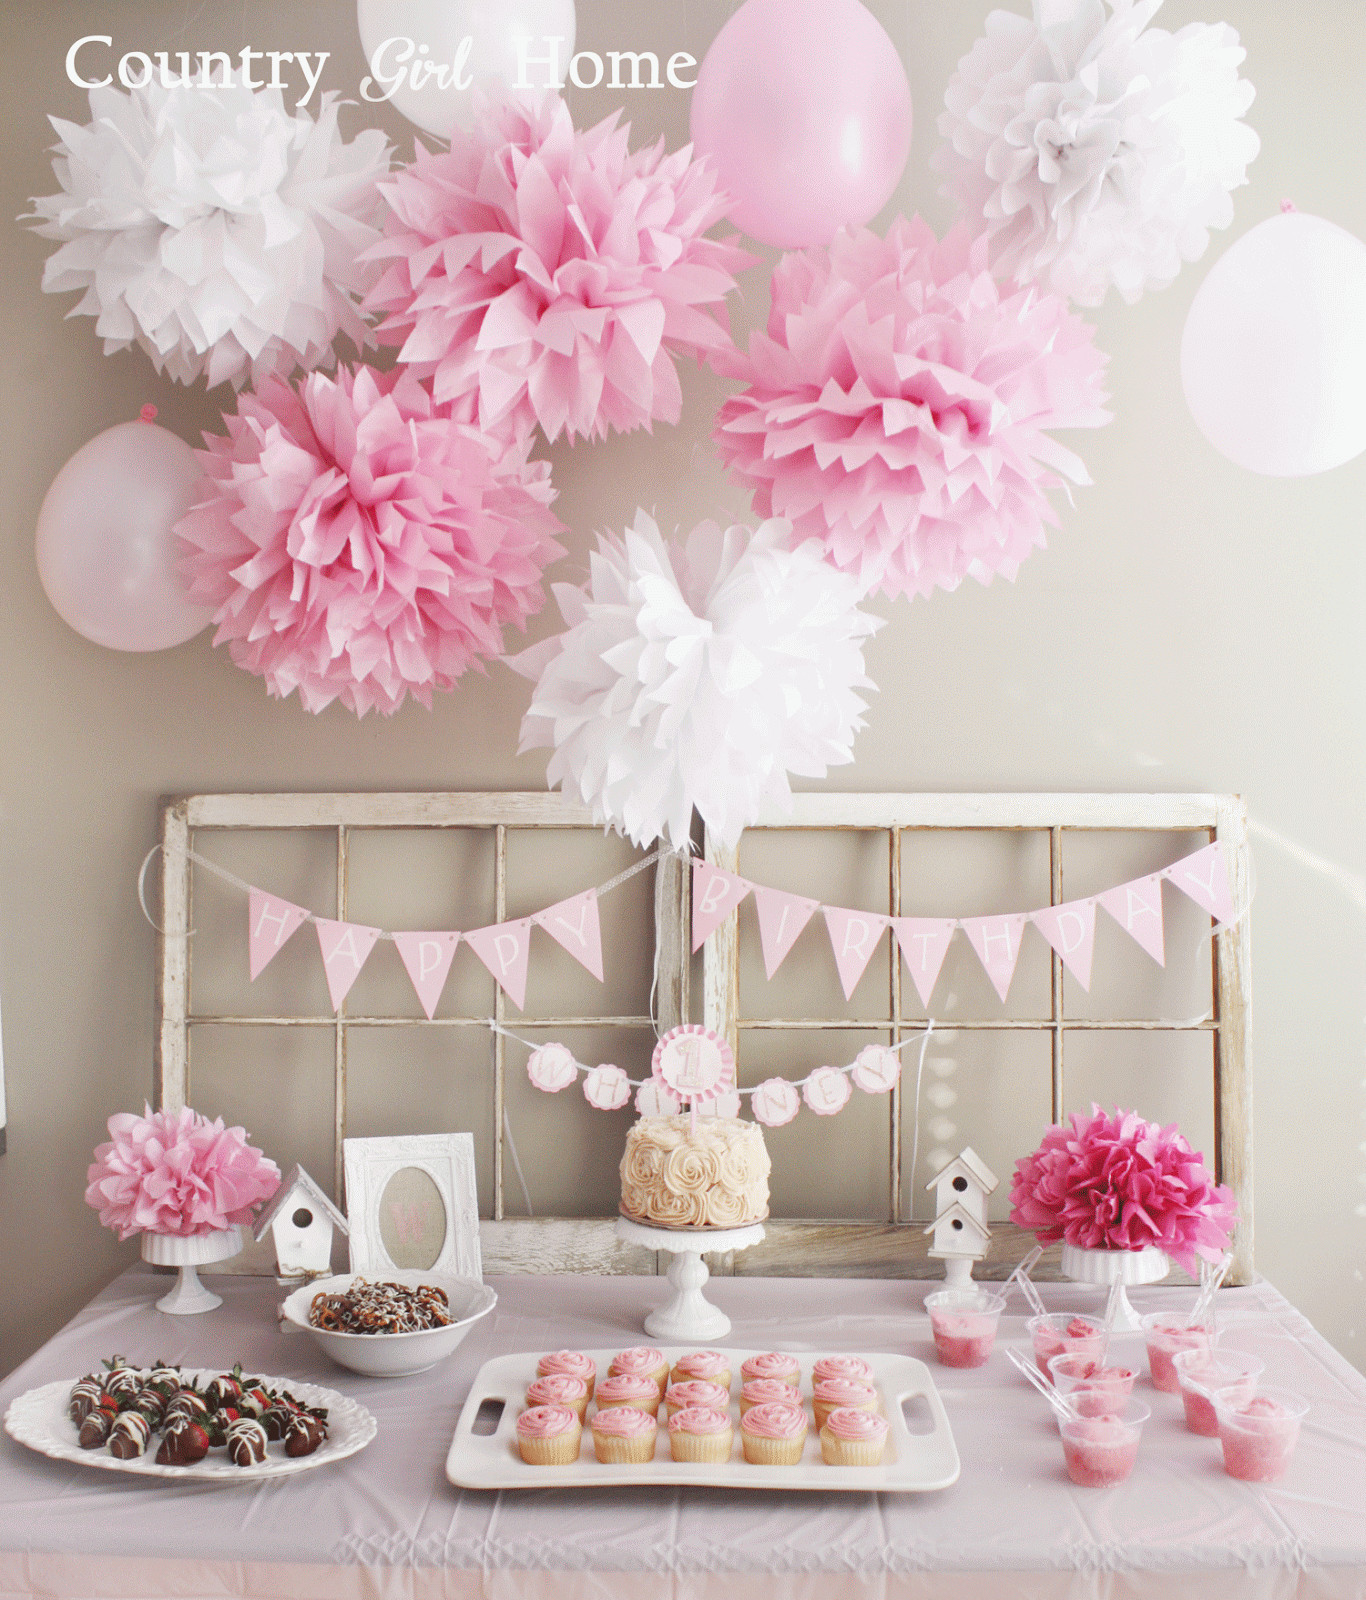 Girl First Birthday Decorations
 COUNTRY GIRL HOME 1st Birthday